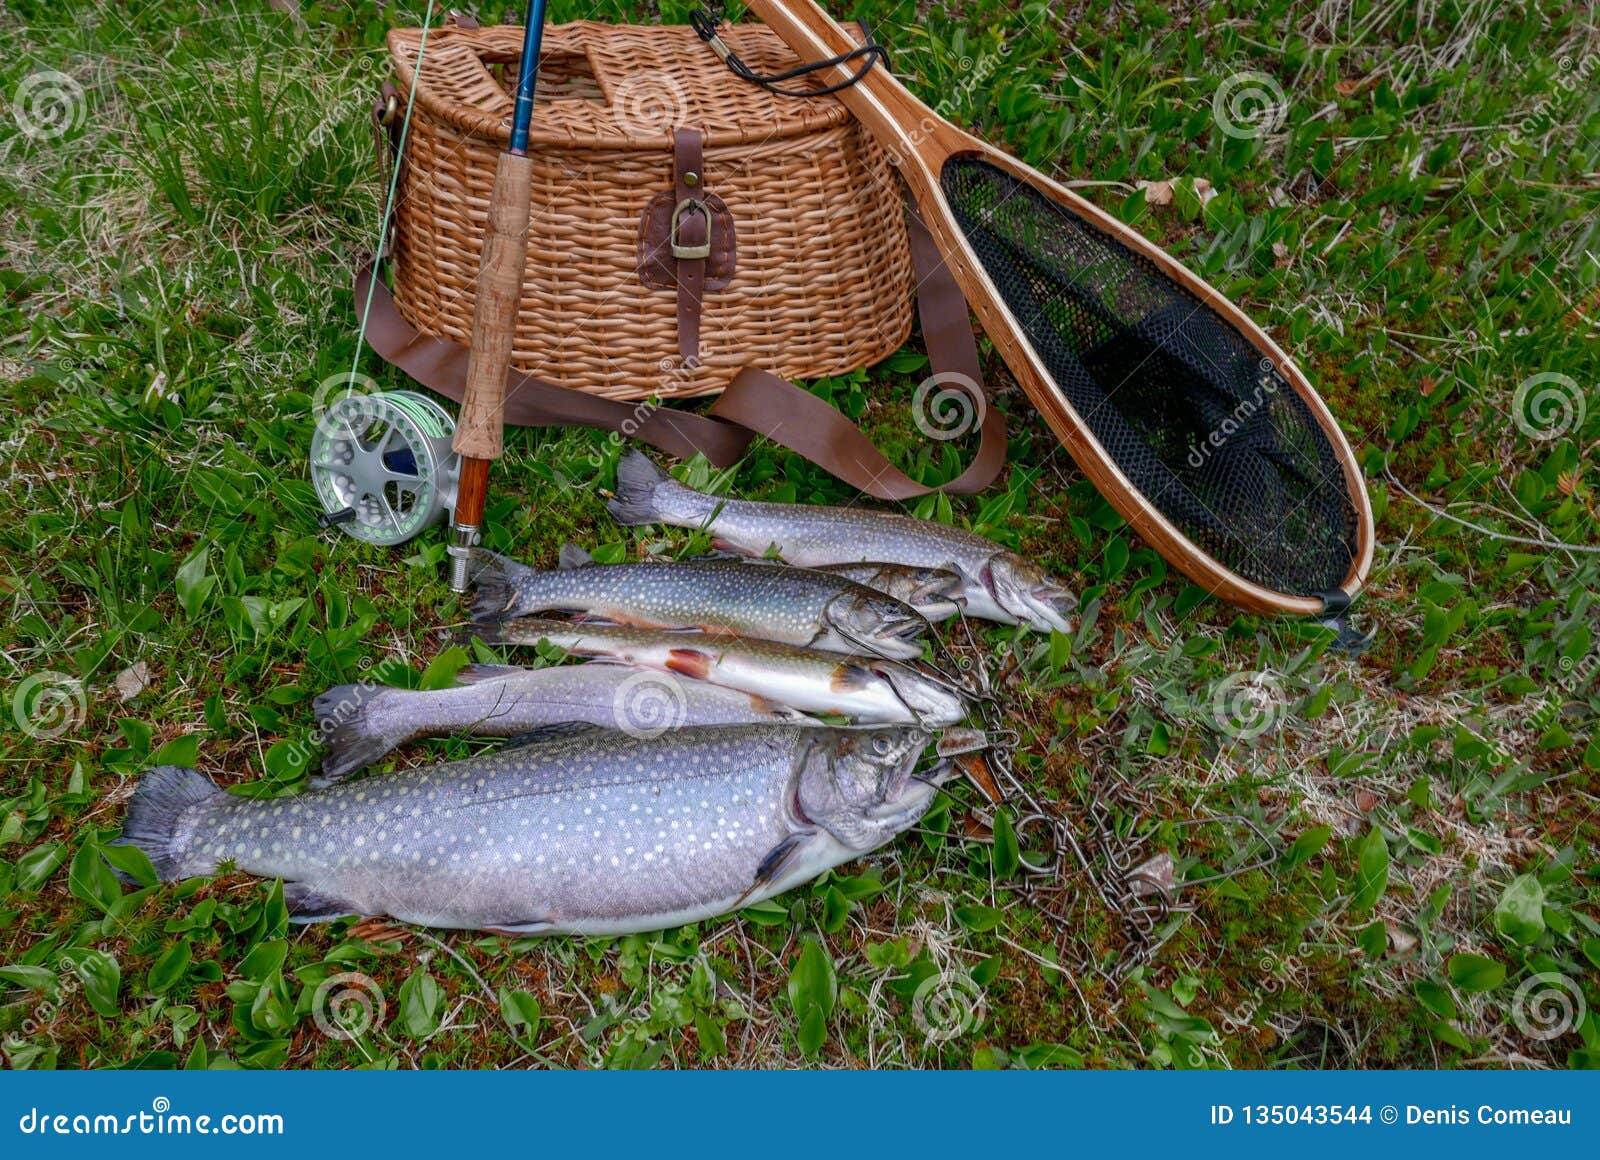 Classic Fly Fishing Tackle with Catch of the Day. Stock Photo